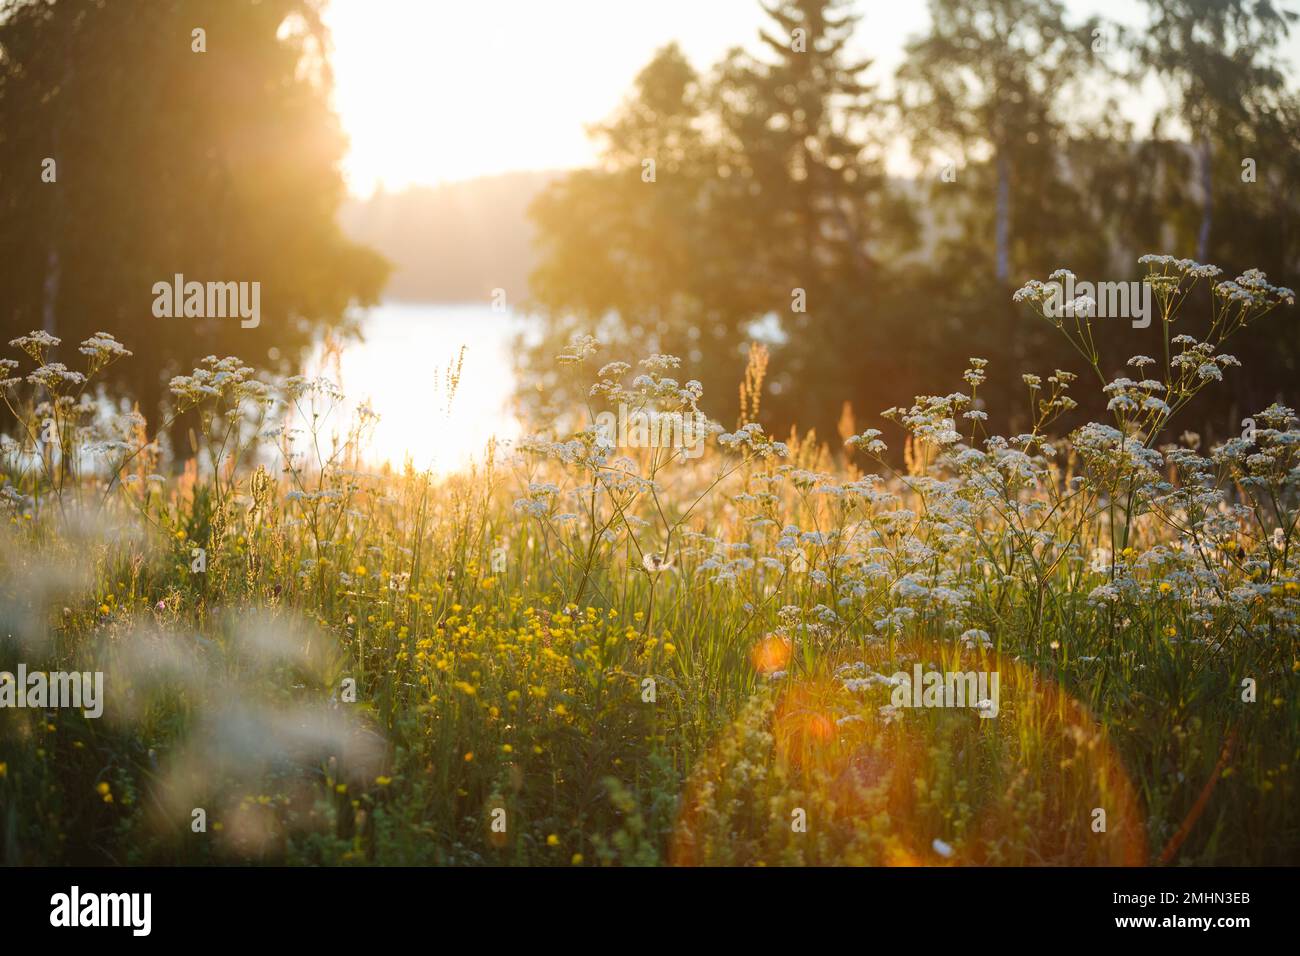 Wildflowers in meadow at sunrise Stock Photo